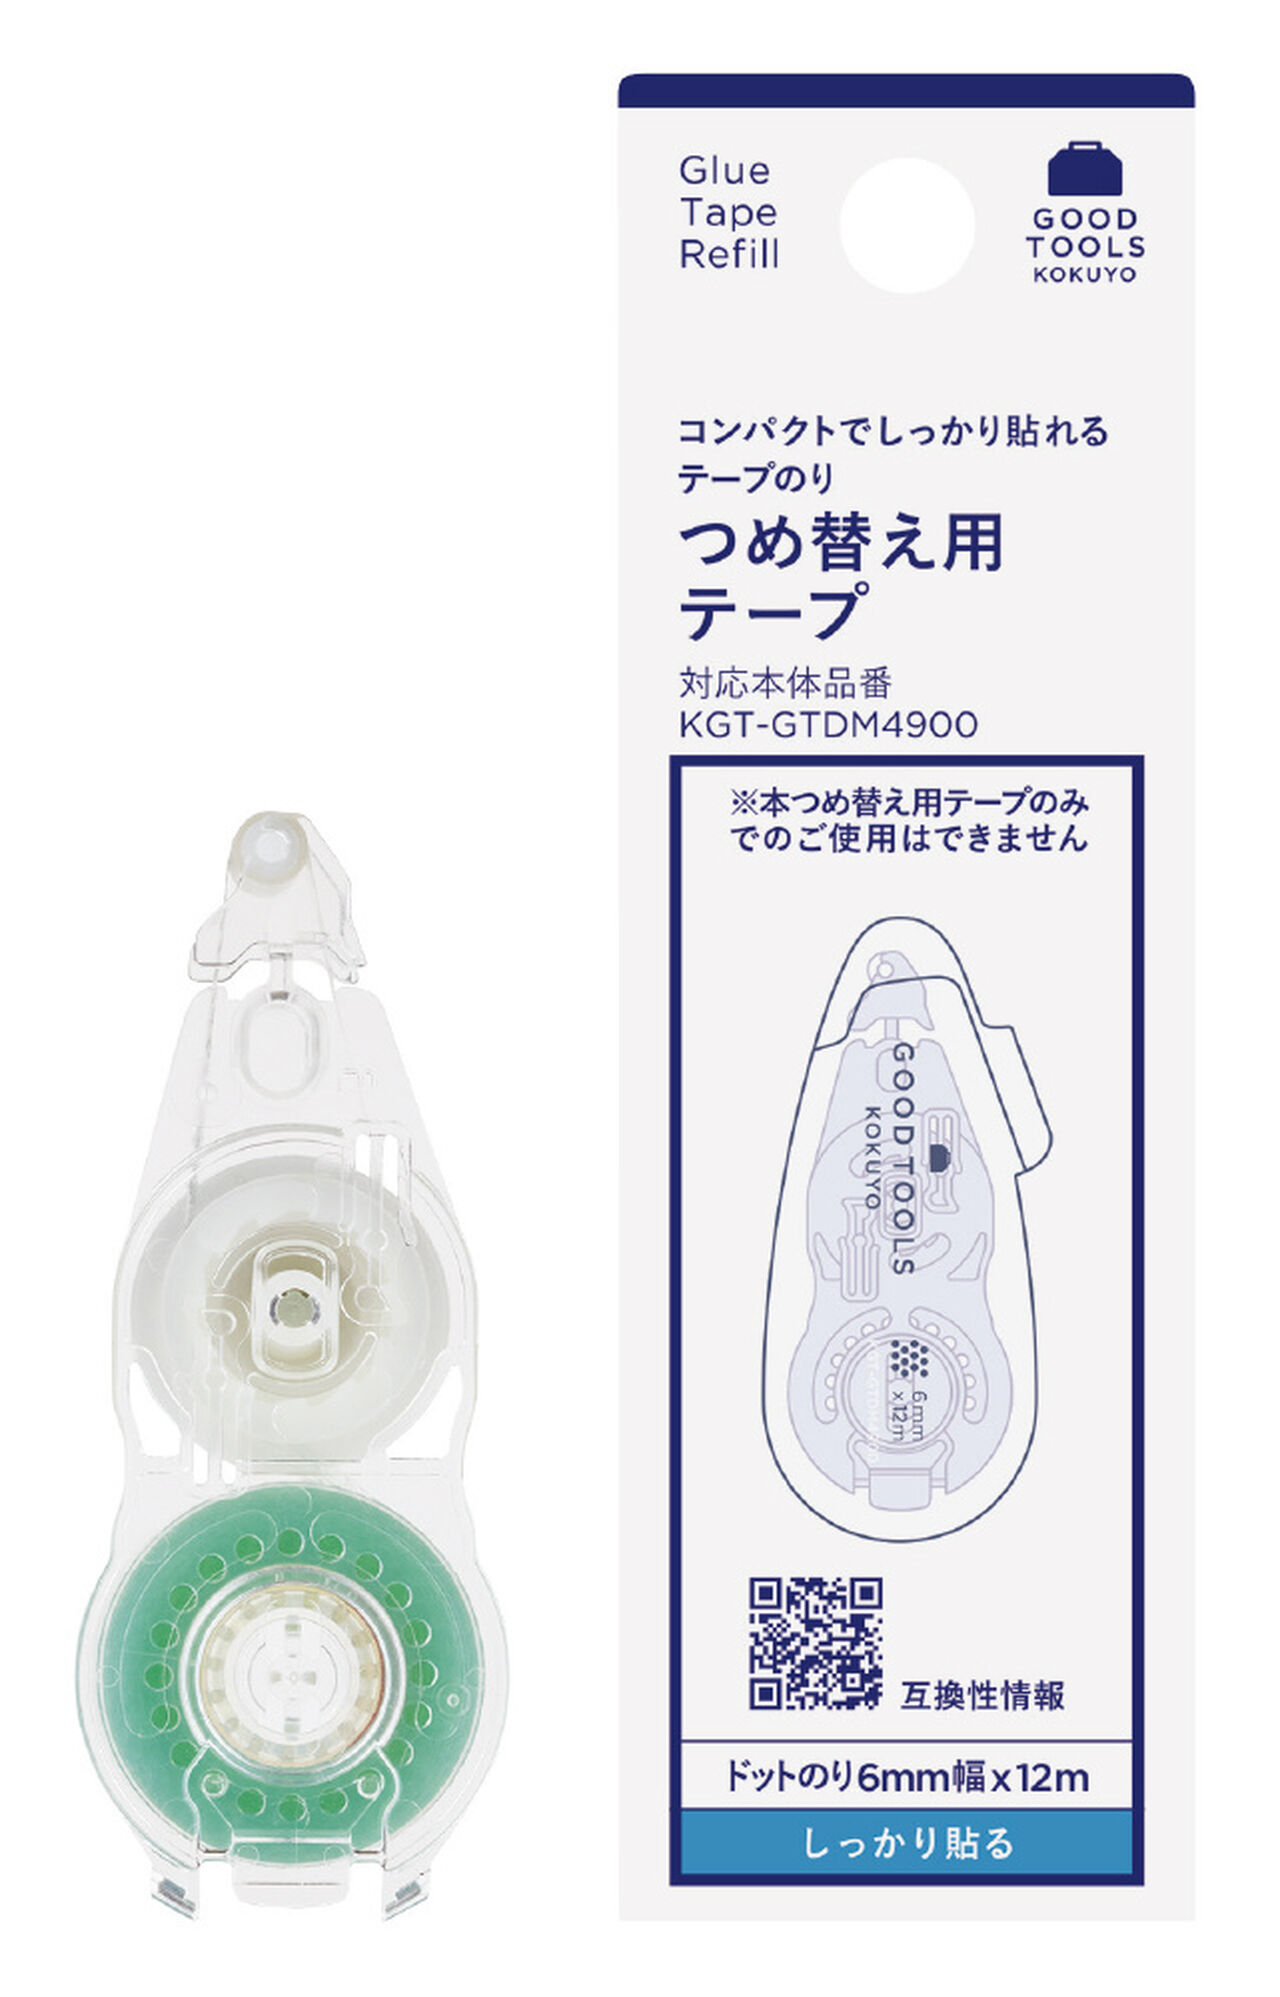 KOKUYO │Official Global Online Store │GOOD TOOLS Tape Glue